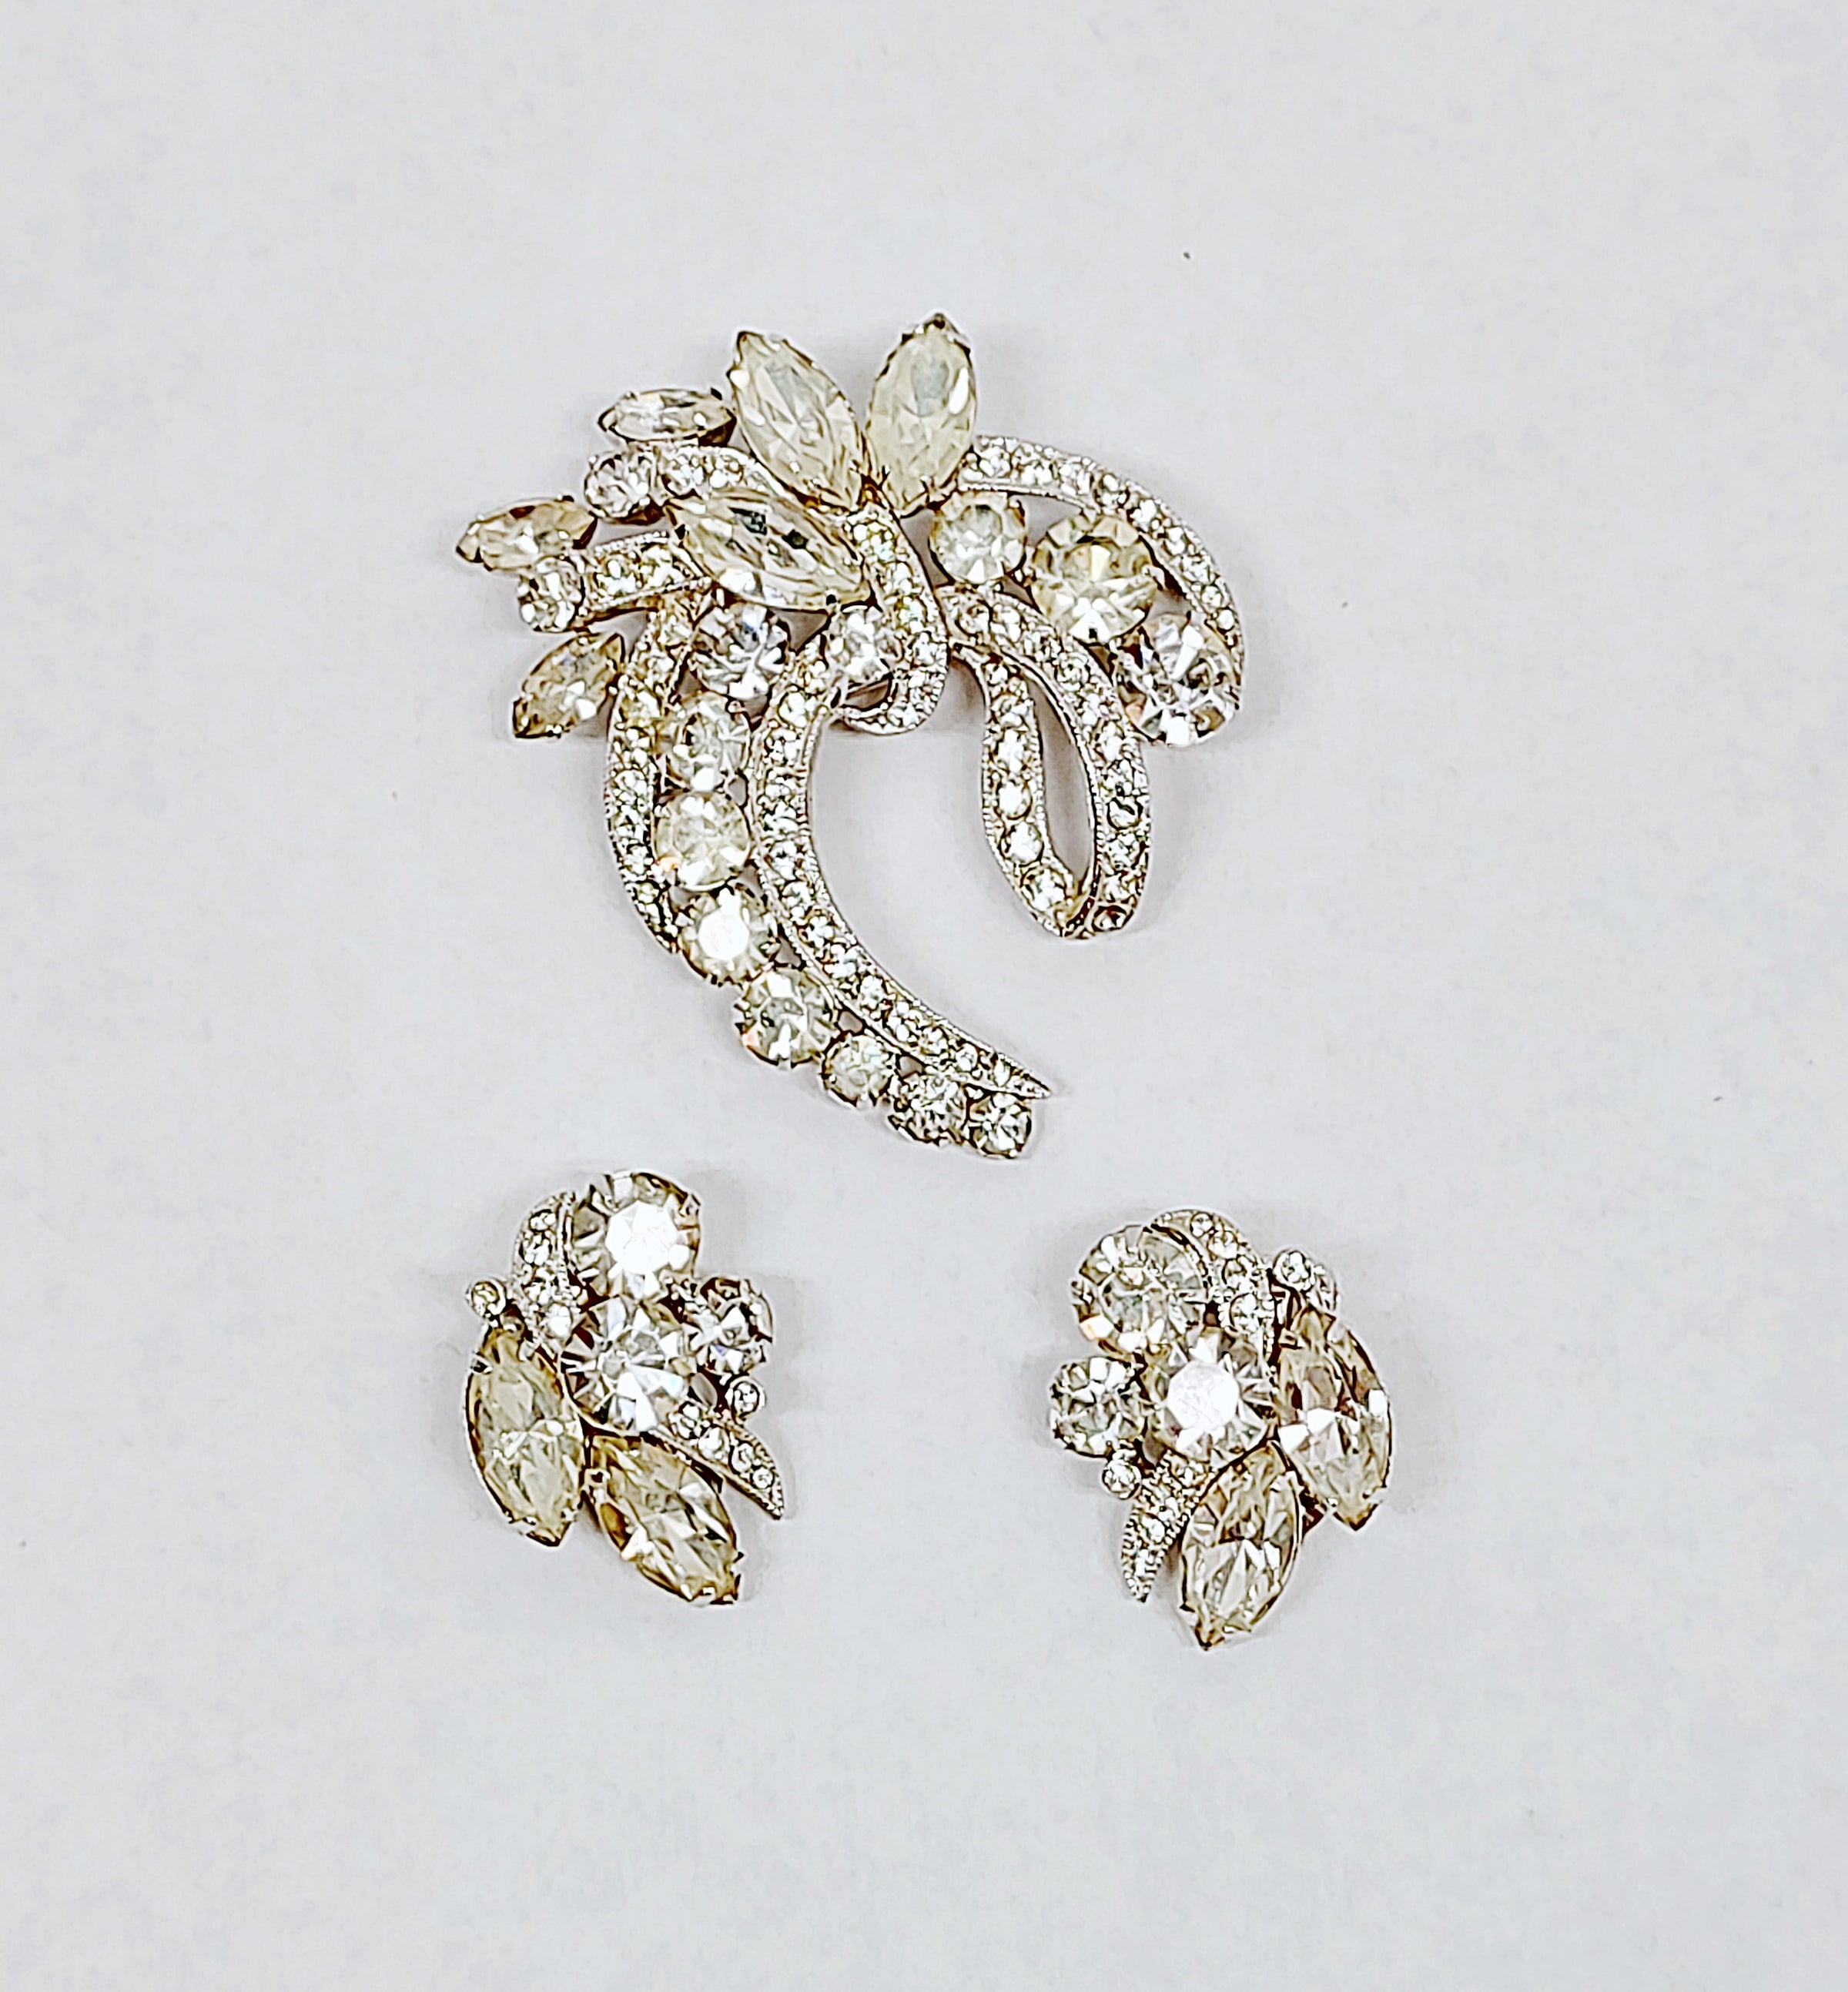 Buy the VNTG Icy Green Clear Earrings Brooch